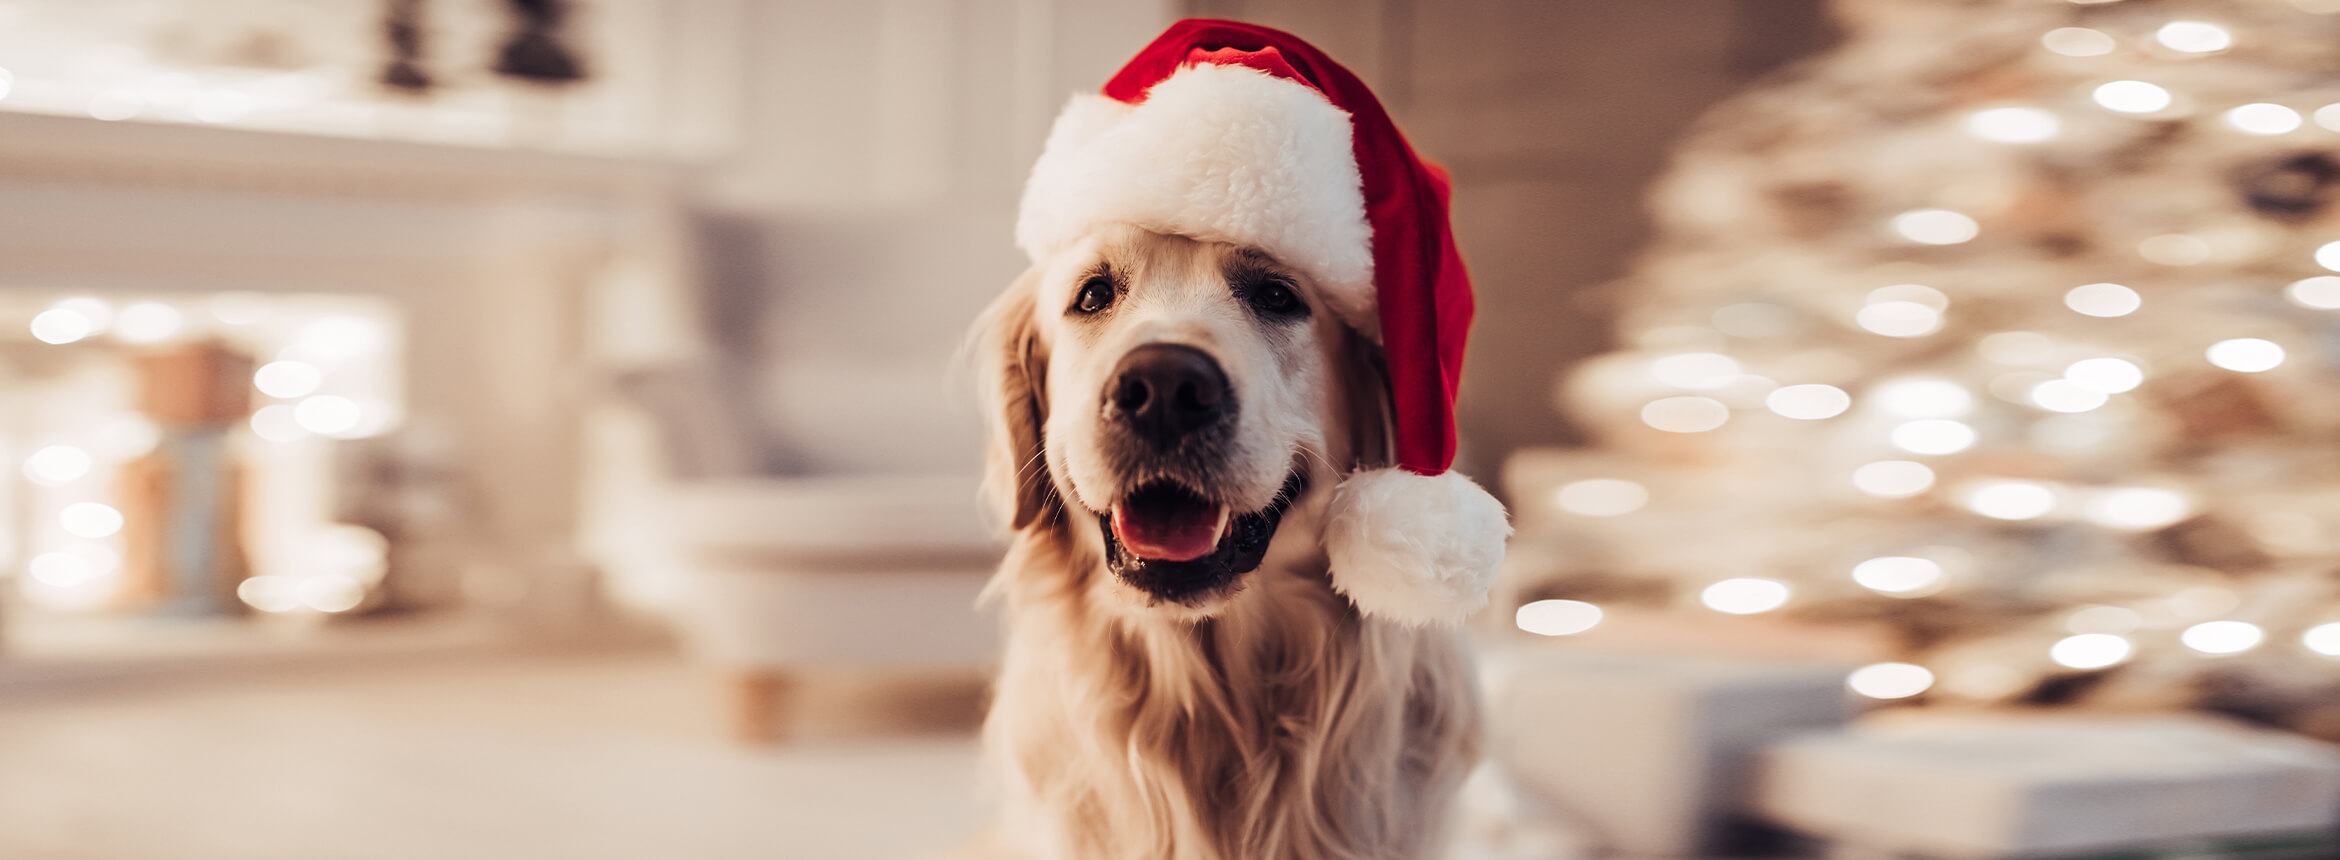 dog wearing Santa hat in living room with Christmas decorations